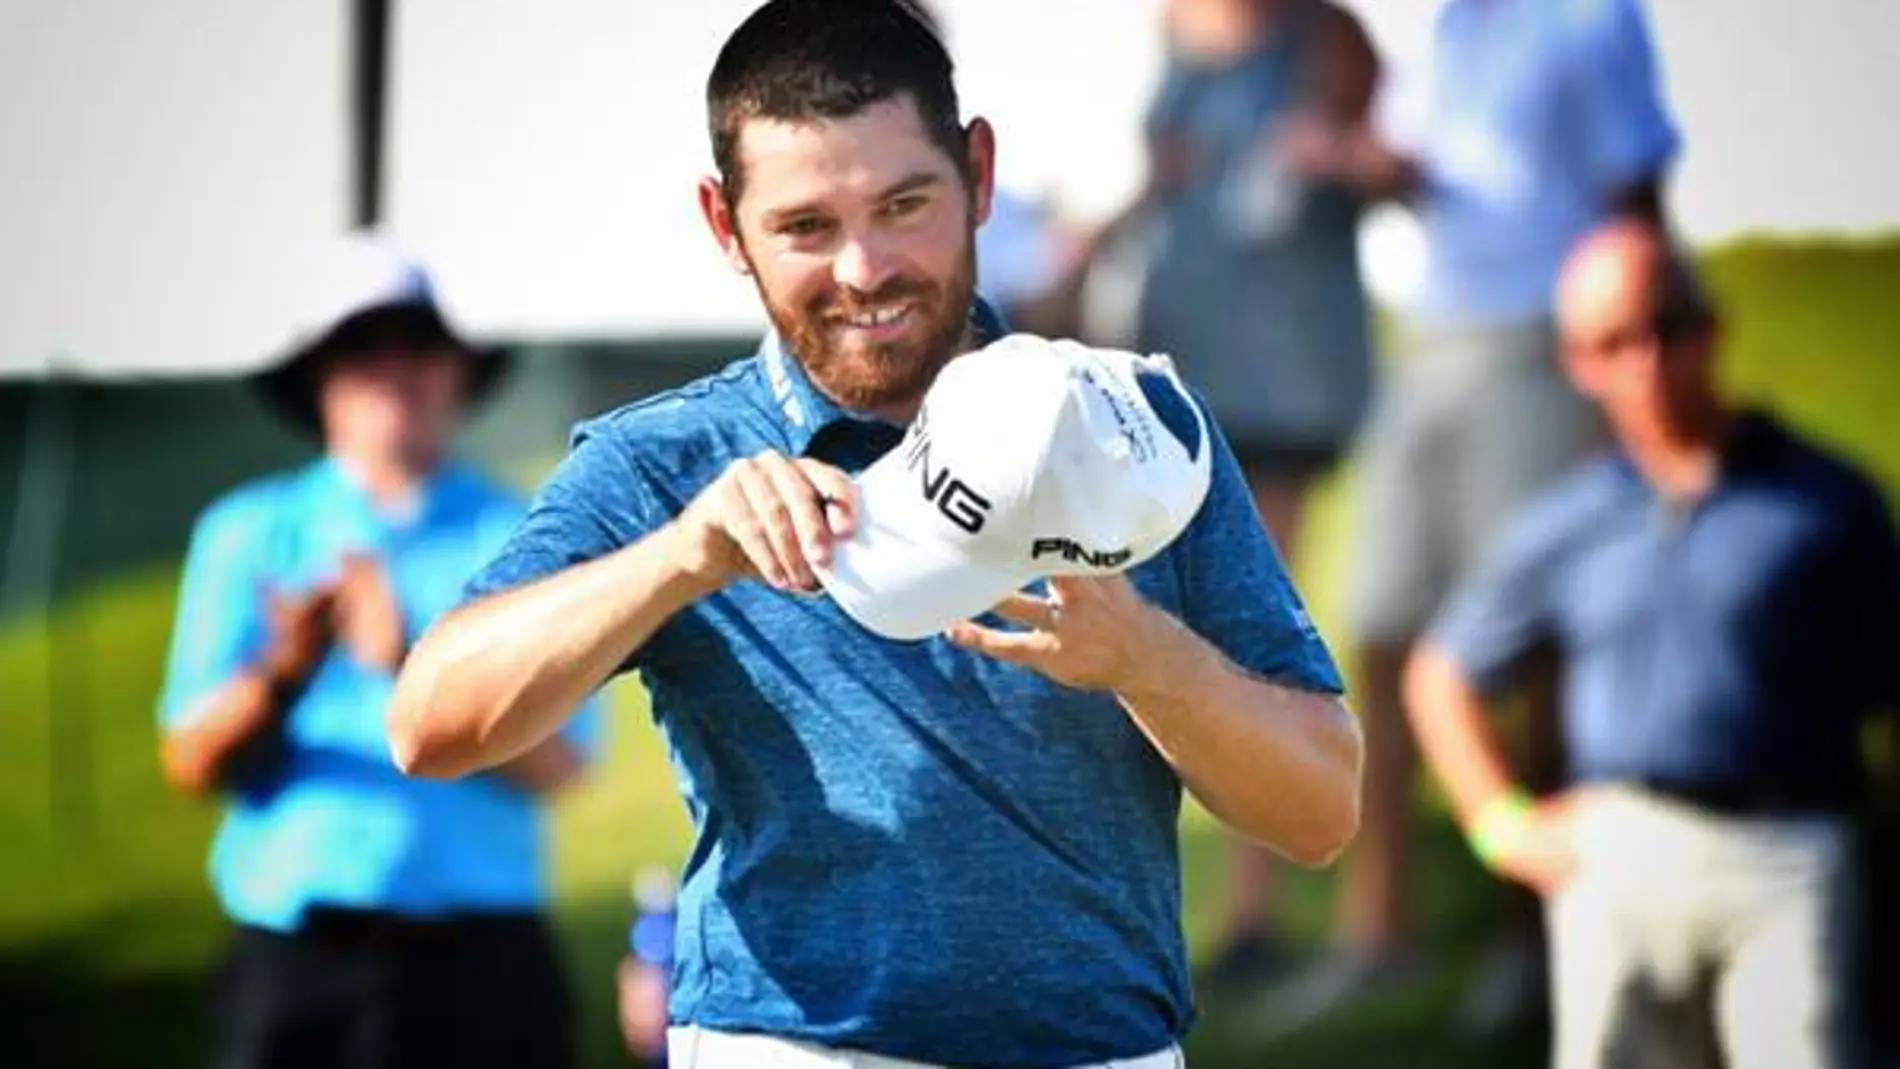 Louis Oosthuizen liderato The Players